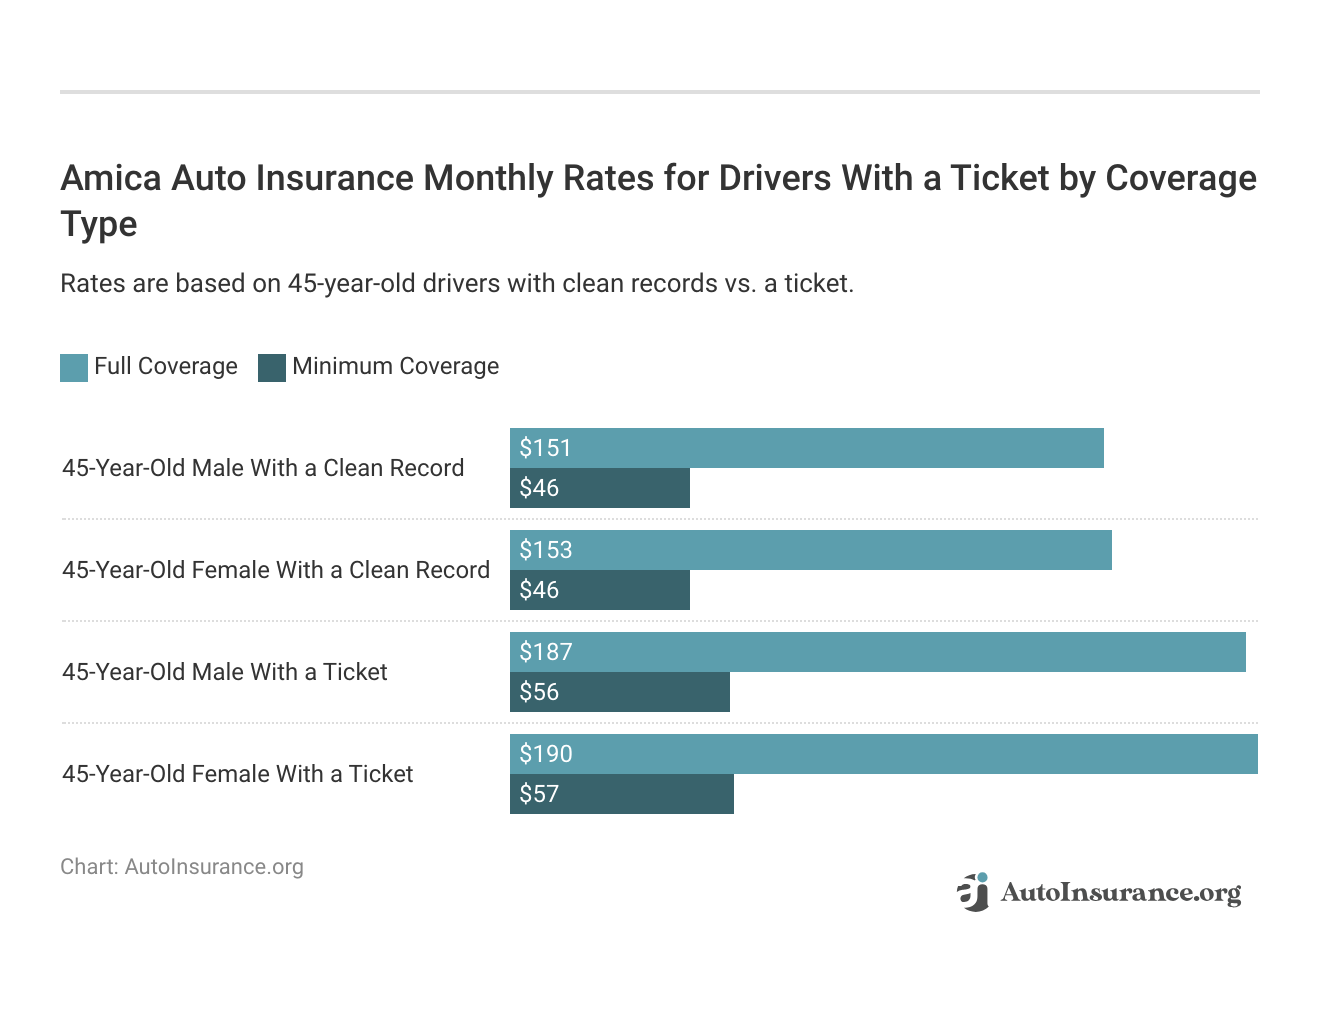 <h3>Amica Auto Insurance Monthly Rates for Drivers With a Ticket by Coverage Type</h3>